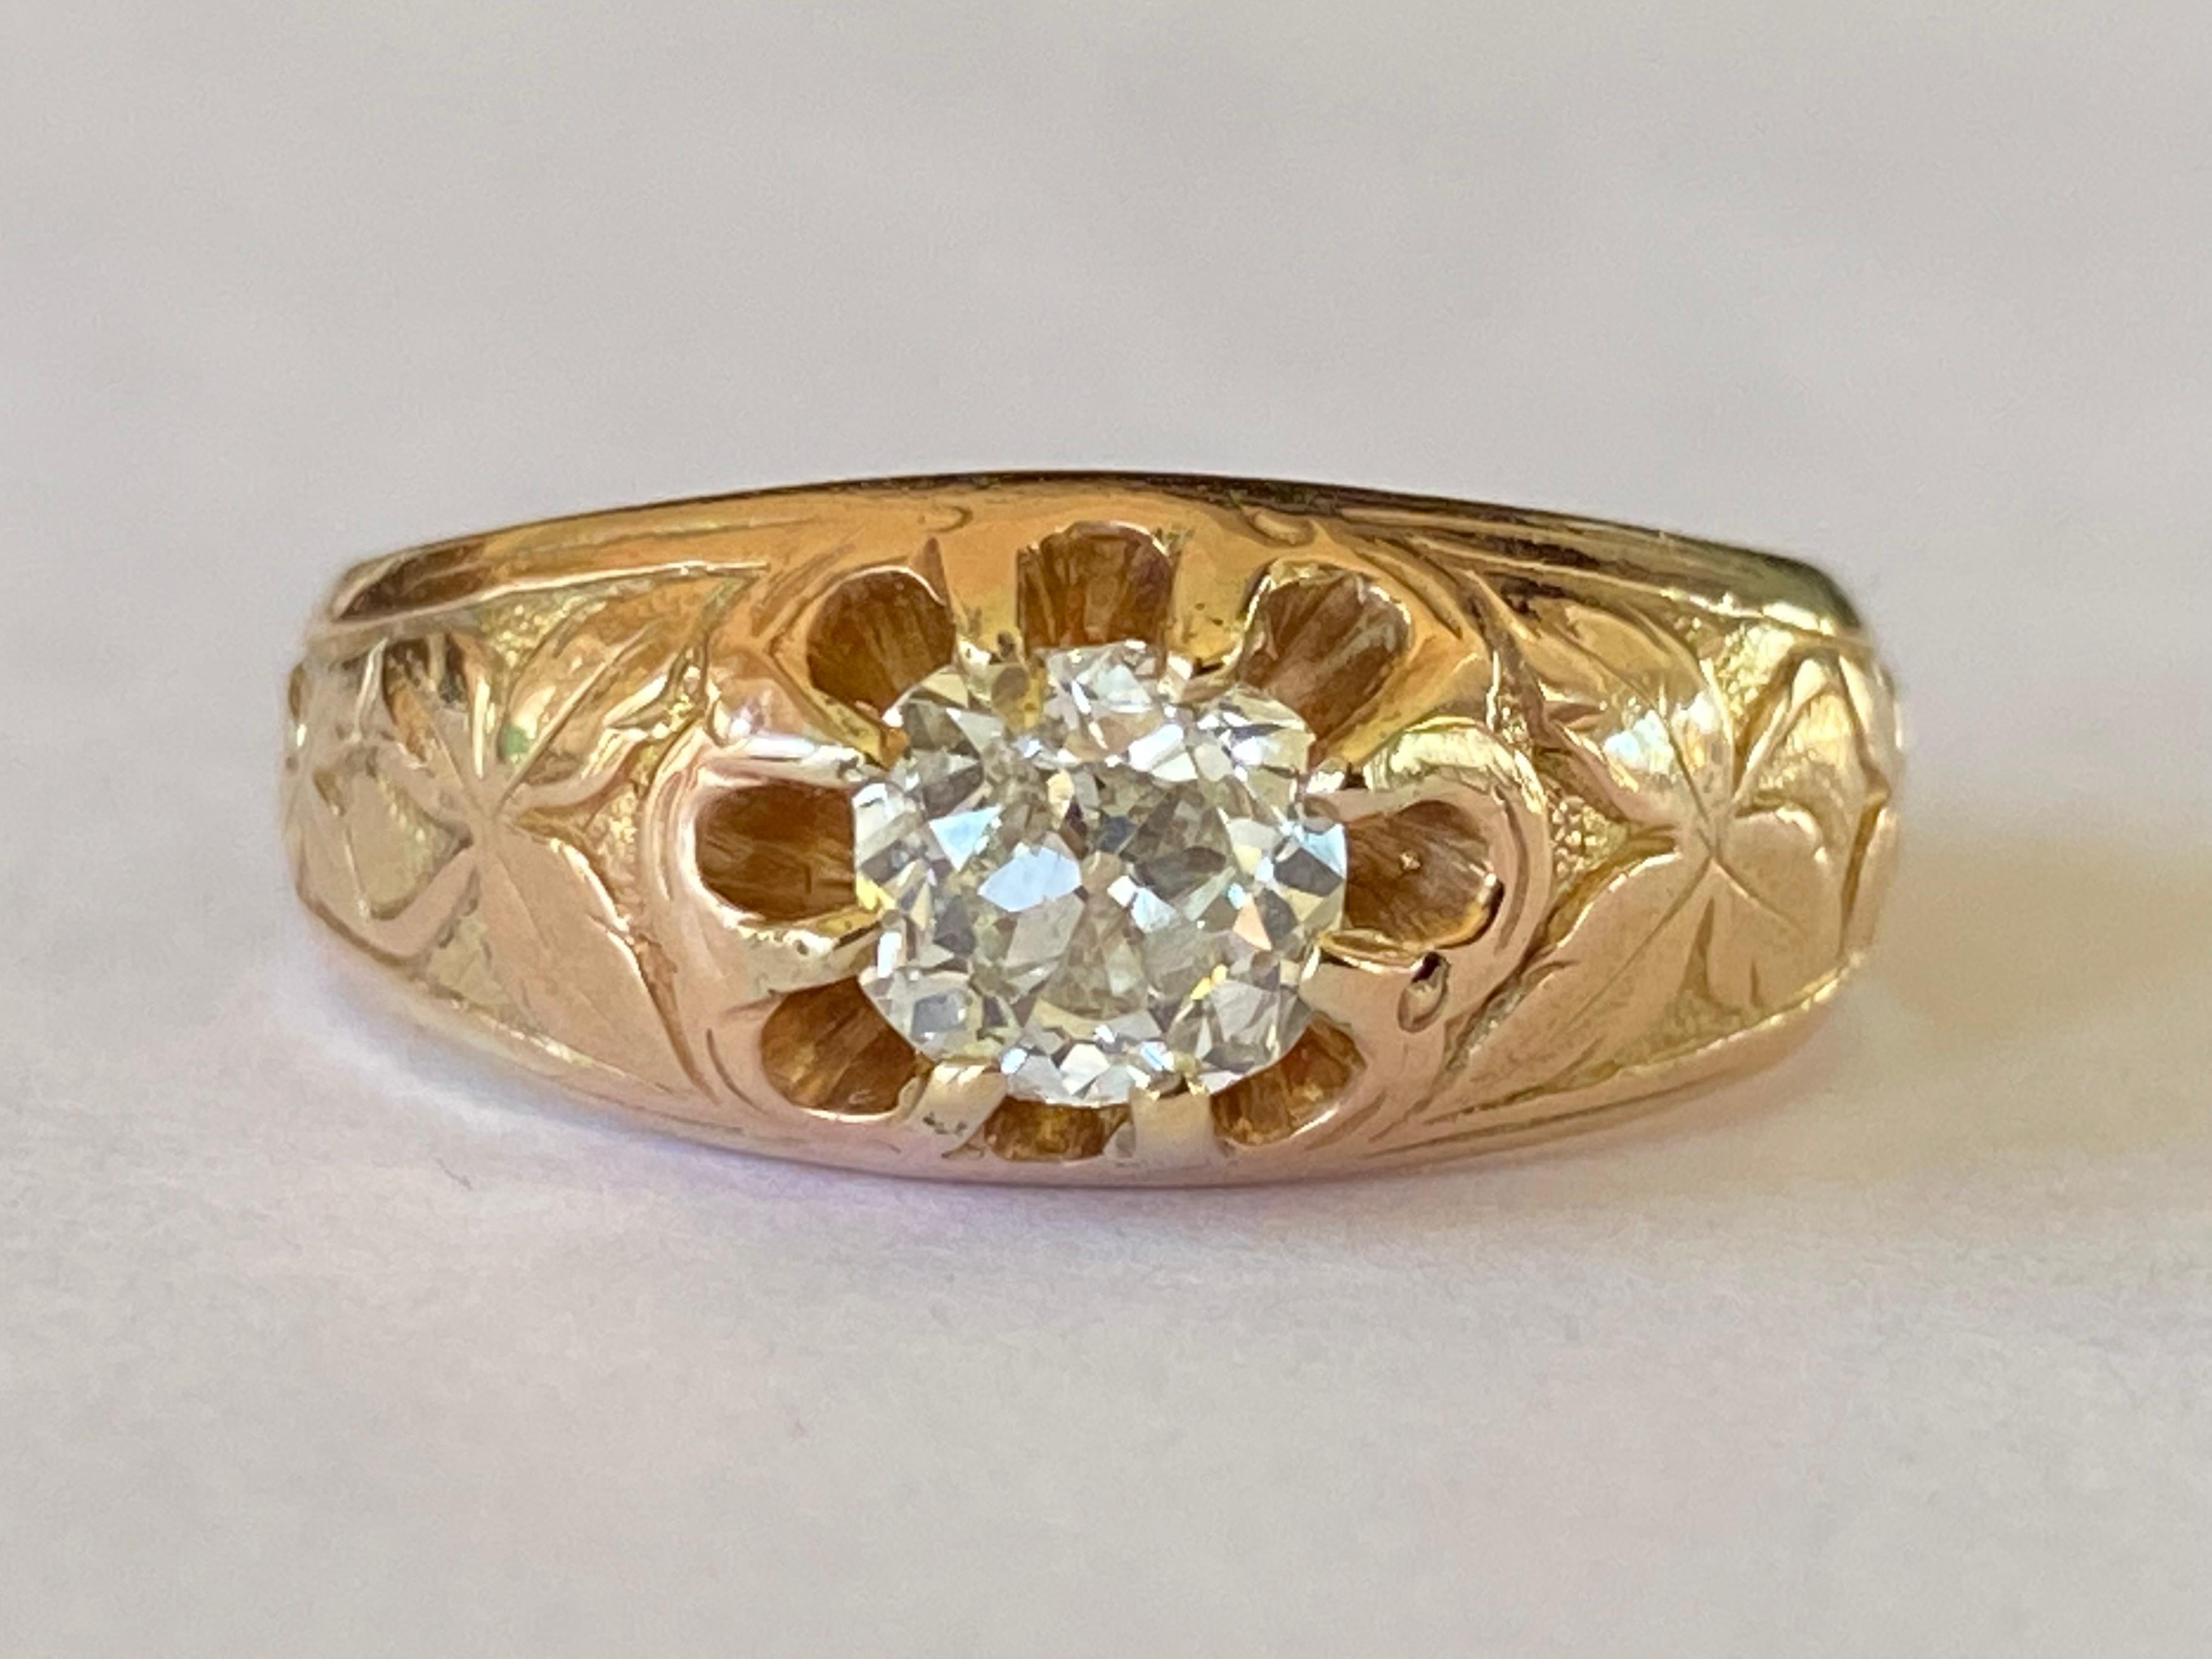 This exquisite Victorian ring handcrafted in the late nineteenth century in 14kt yellow and rose gold features a natural Old Mine cut center stone measuring 5.54 x 5.74 x 3.81mm and approximately 0.90 carats, I-J color, SI2 clarity mounted in a